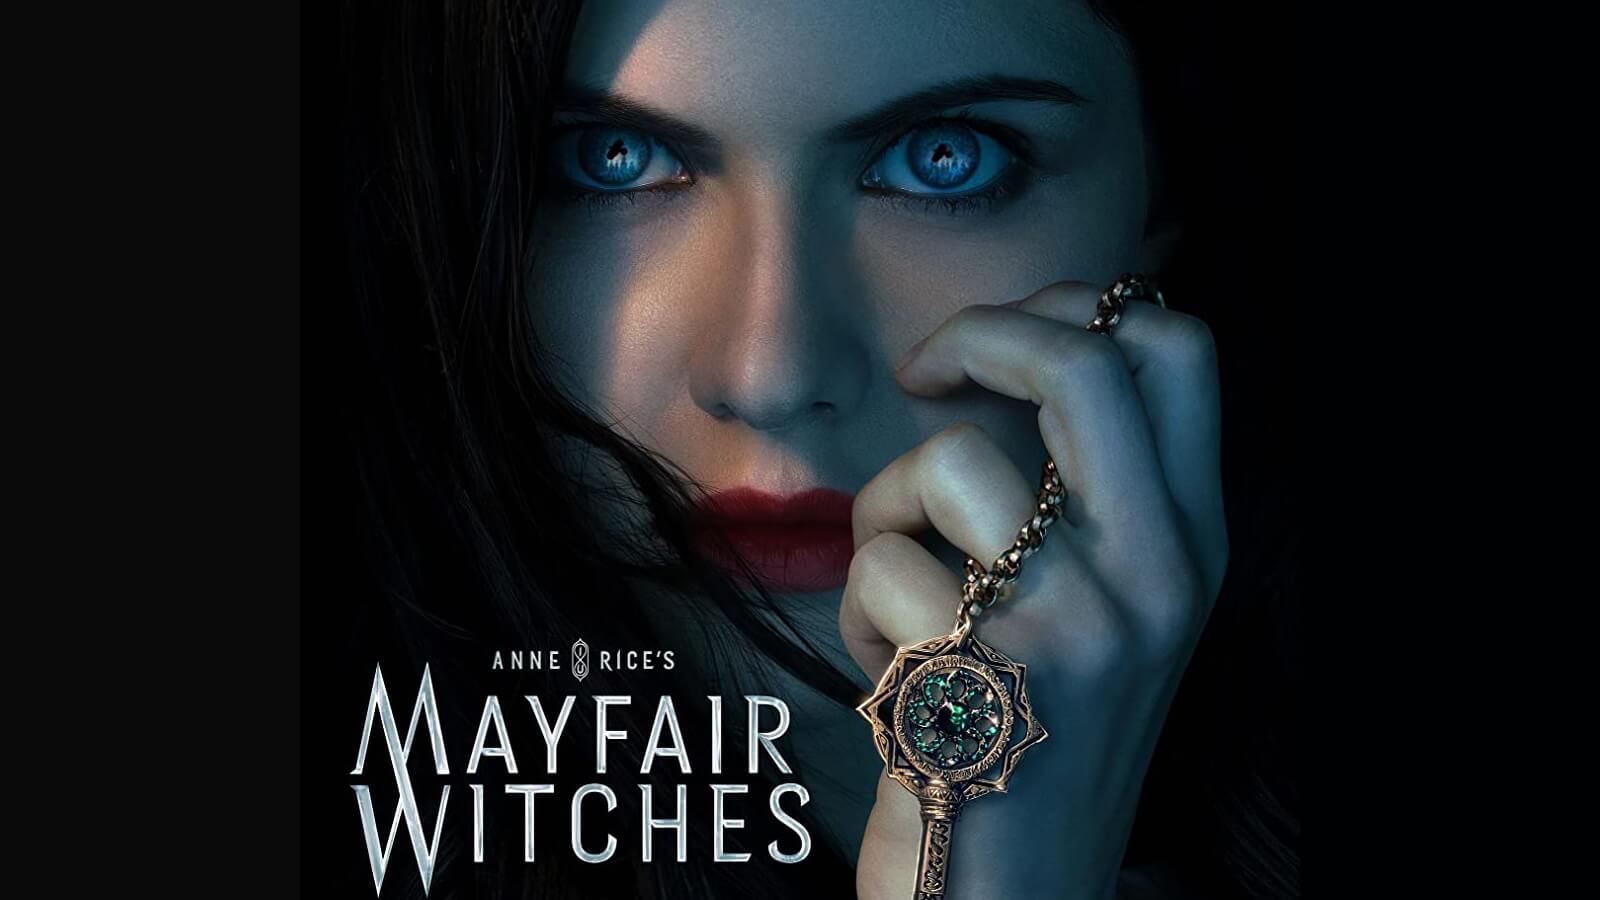 anne rice mayfair witches torrent